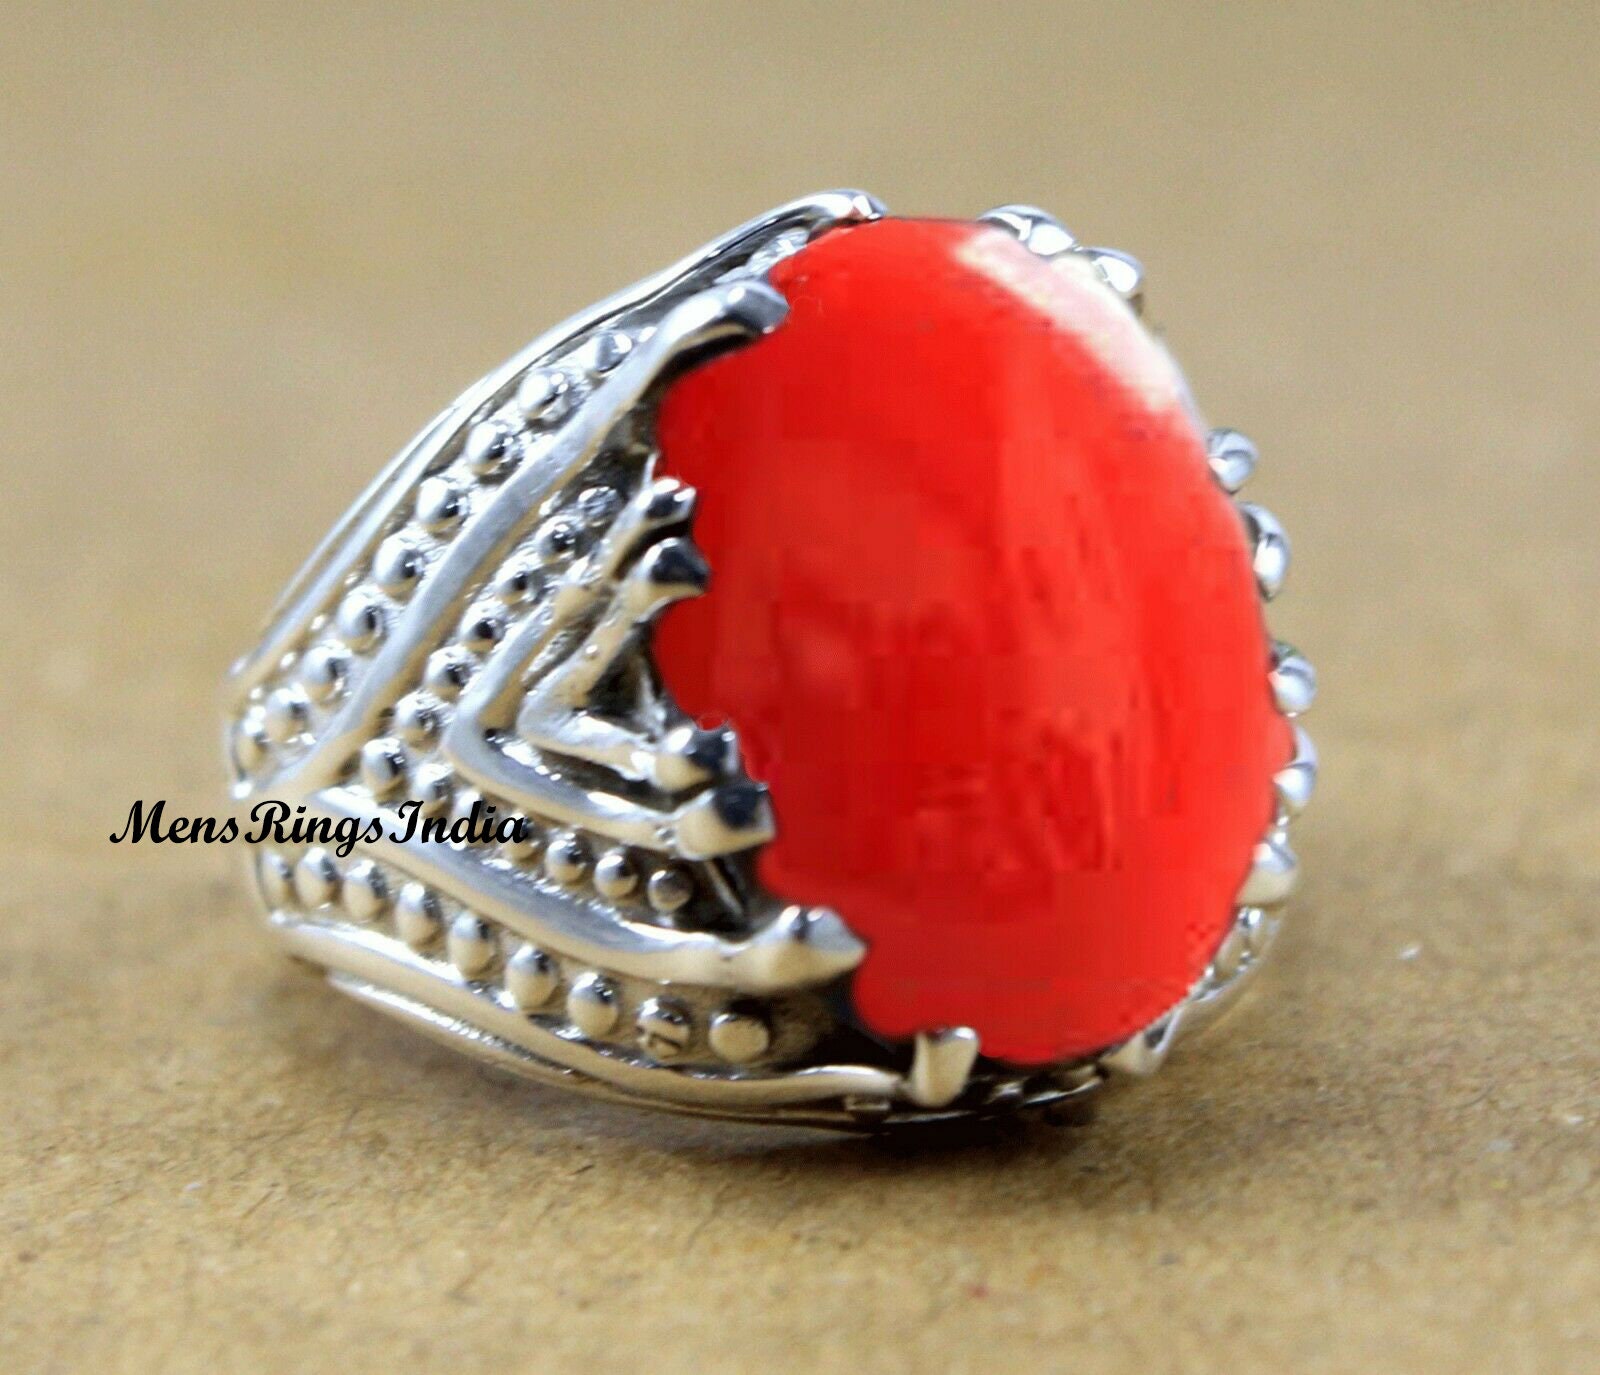 Buy Red Coral Mens Ring, Flat Coral Gemstone Ring, Statement Mens Ring,  Dainty Ring, Turkish Mens Ring, Signet Mens Ring, Handmade Ring, Gifts  Online in India - Etsy